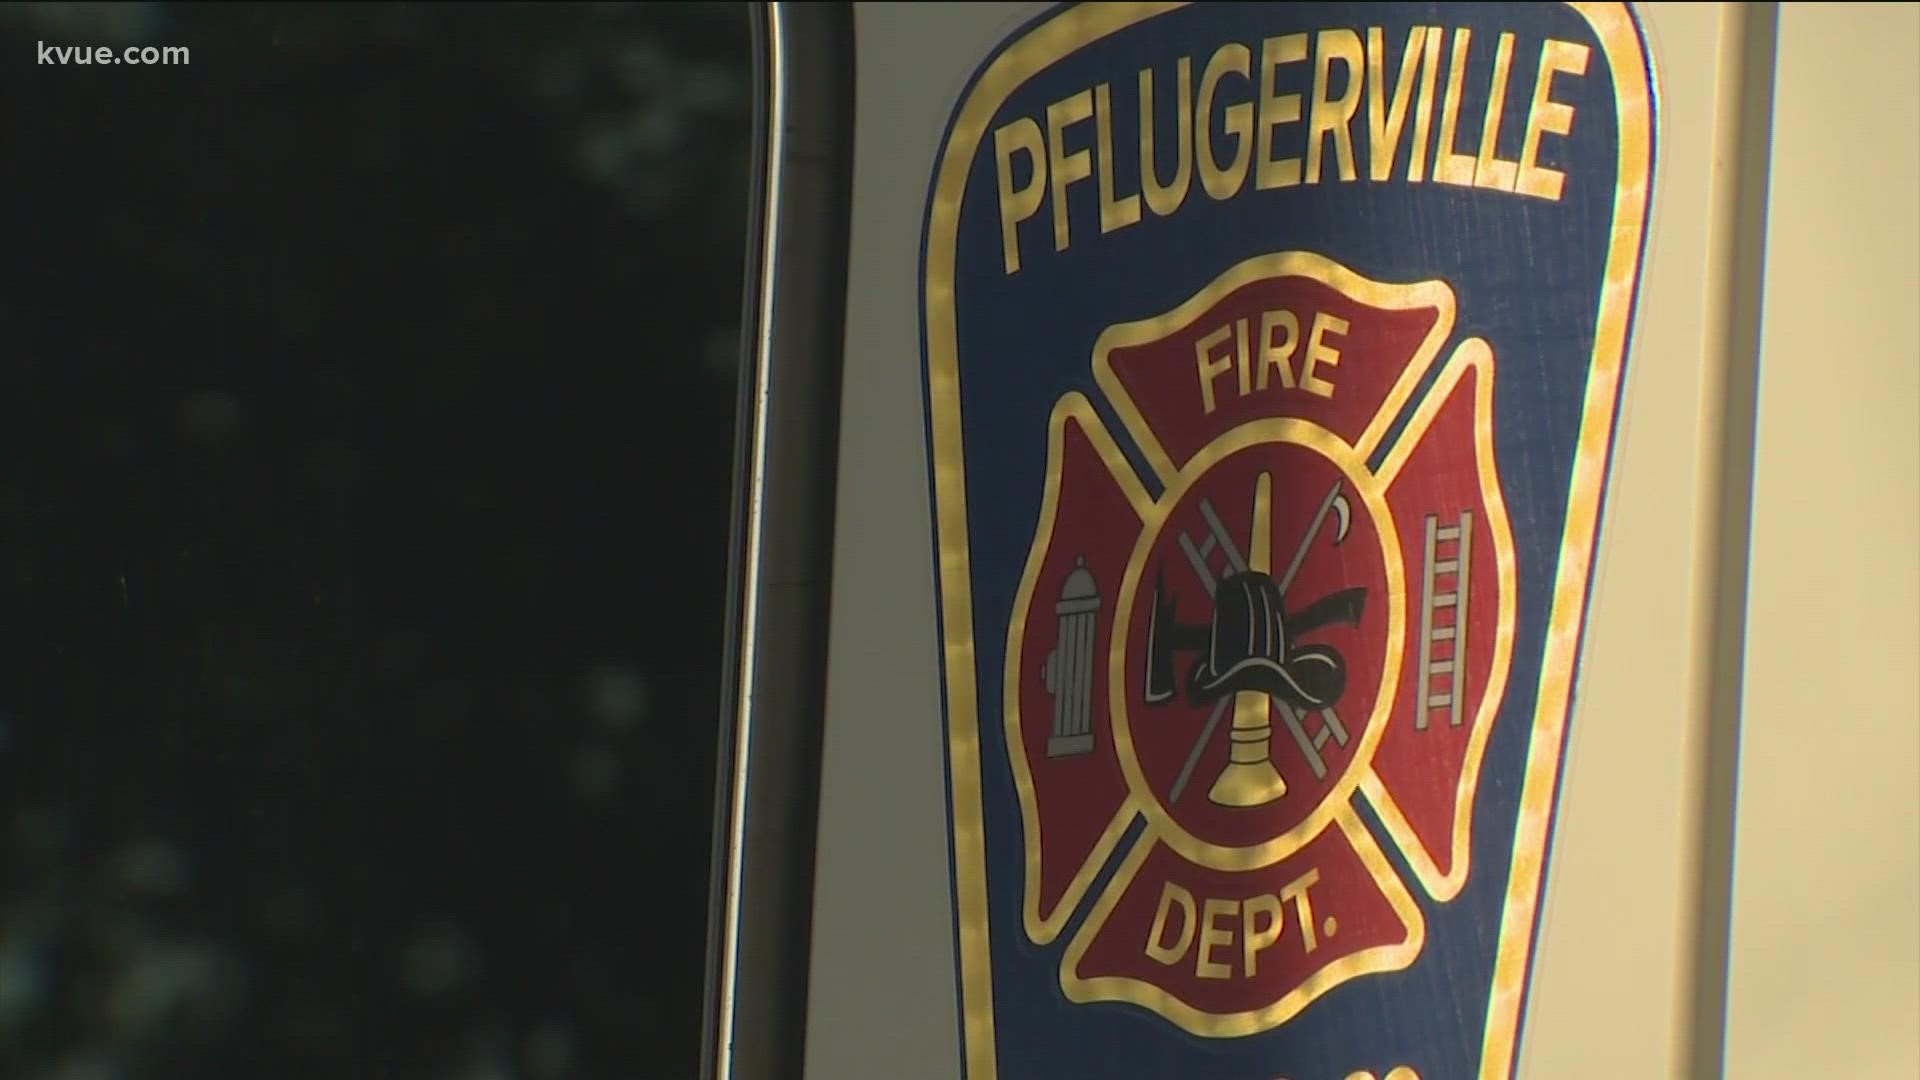 At a meeting Tuesday night, the Pflugerville City Council voted to continue with negotiations.